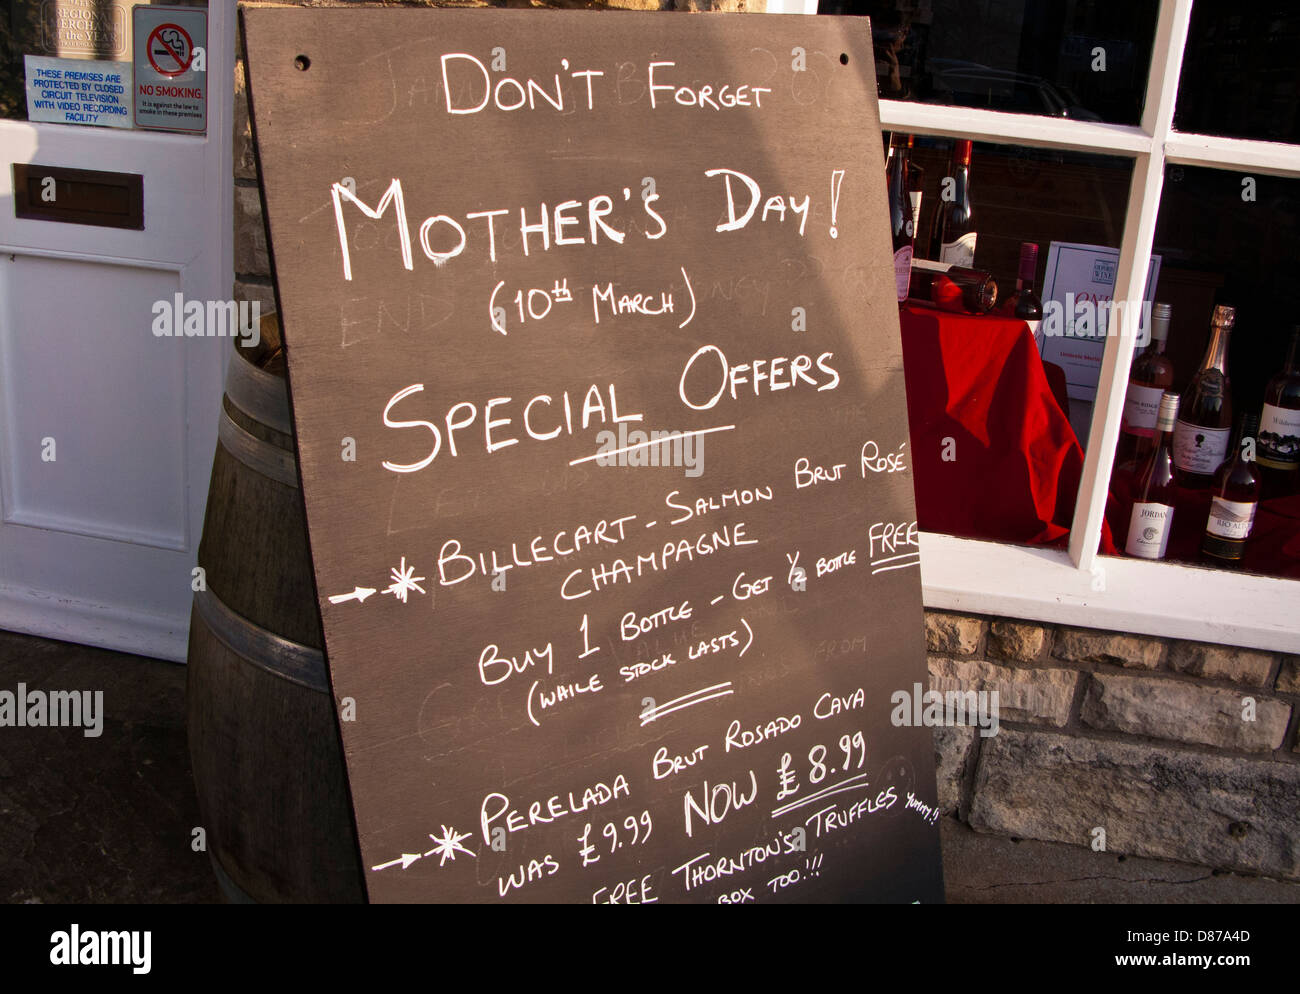 Mother's Day offers by off-license, UK Stock Photo